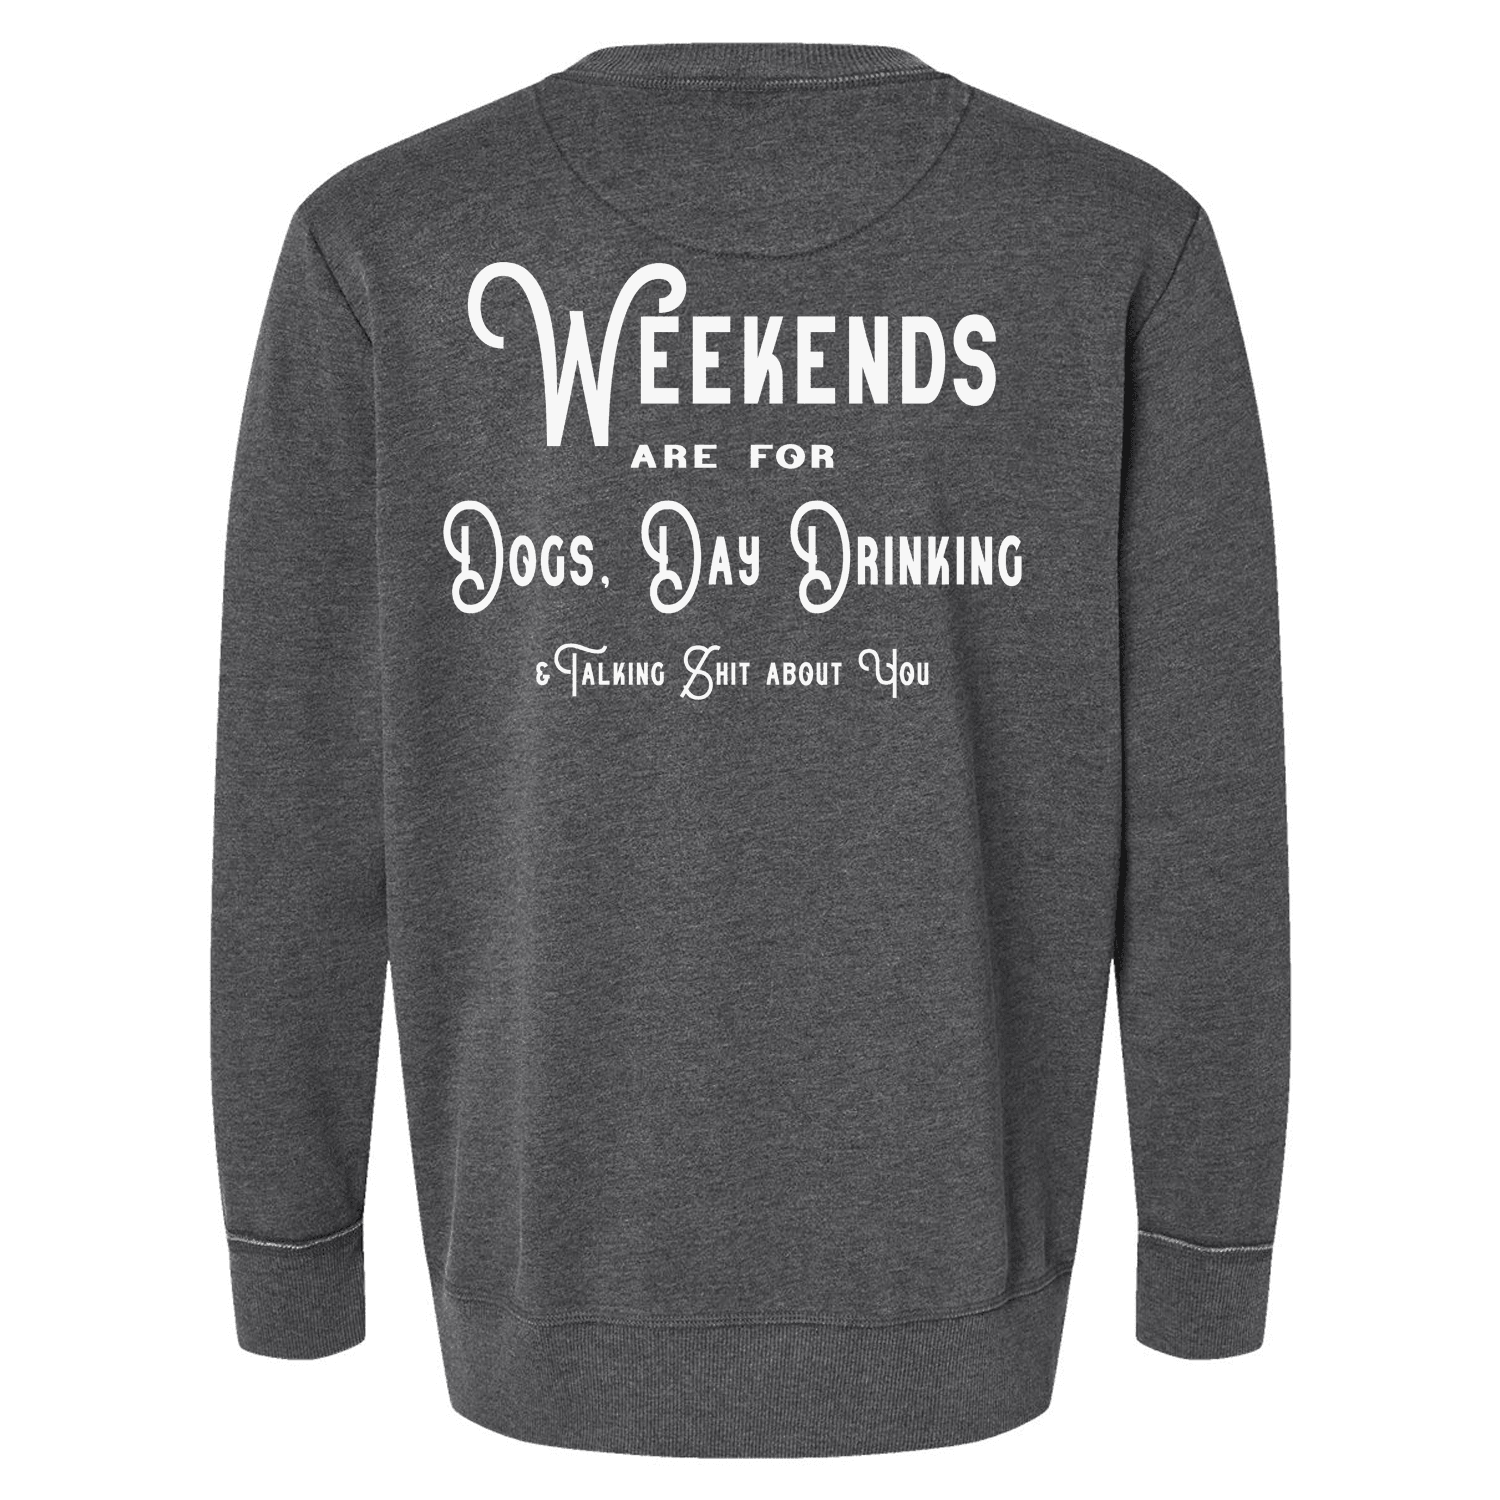 Weekends are For Dogs, day drinking.. Sweatshirt - Ales to Trails